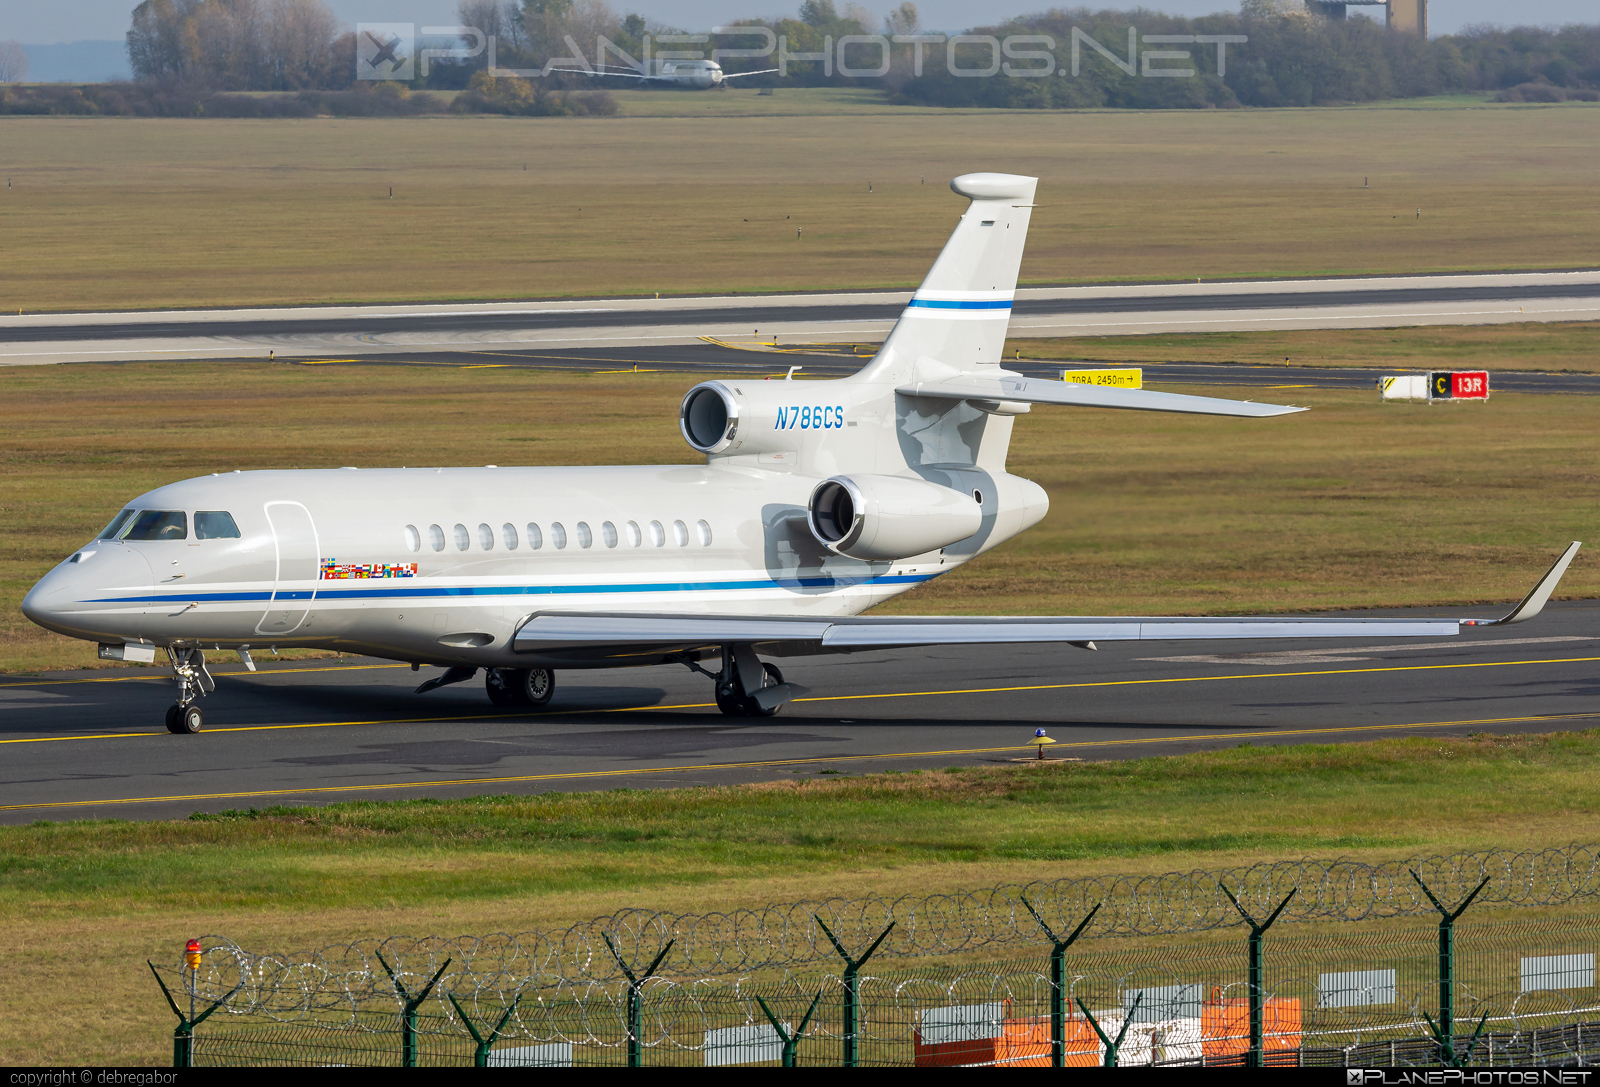 Dassault Falcon 7X - N786CS operated by Private operator #dassault #dassaultfalcon #dassaultfalcon7x #falcon7x